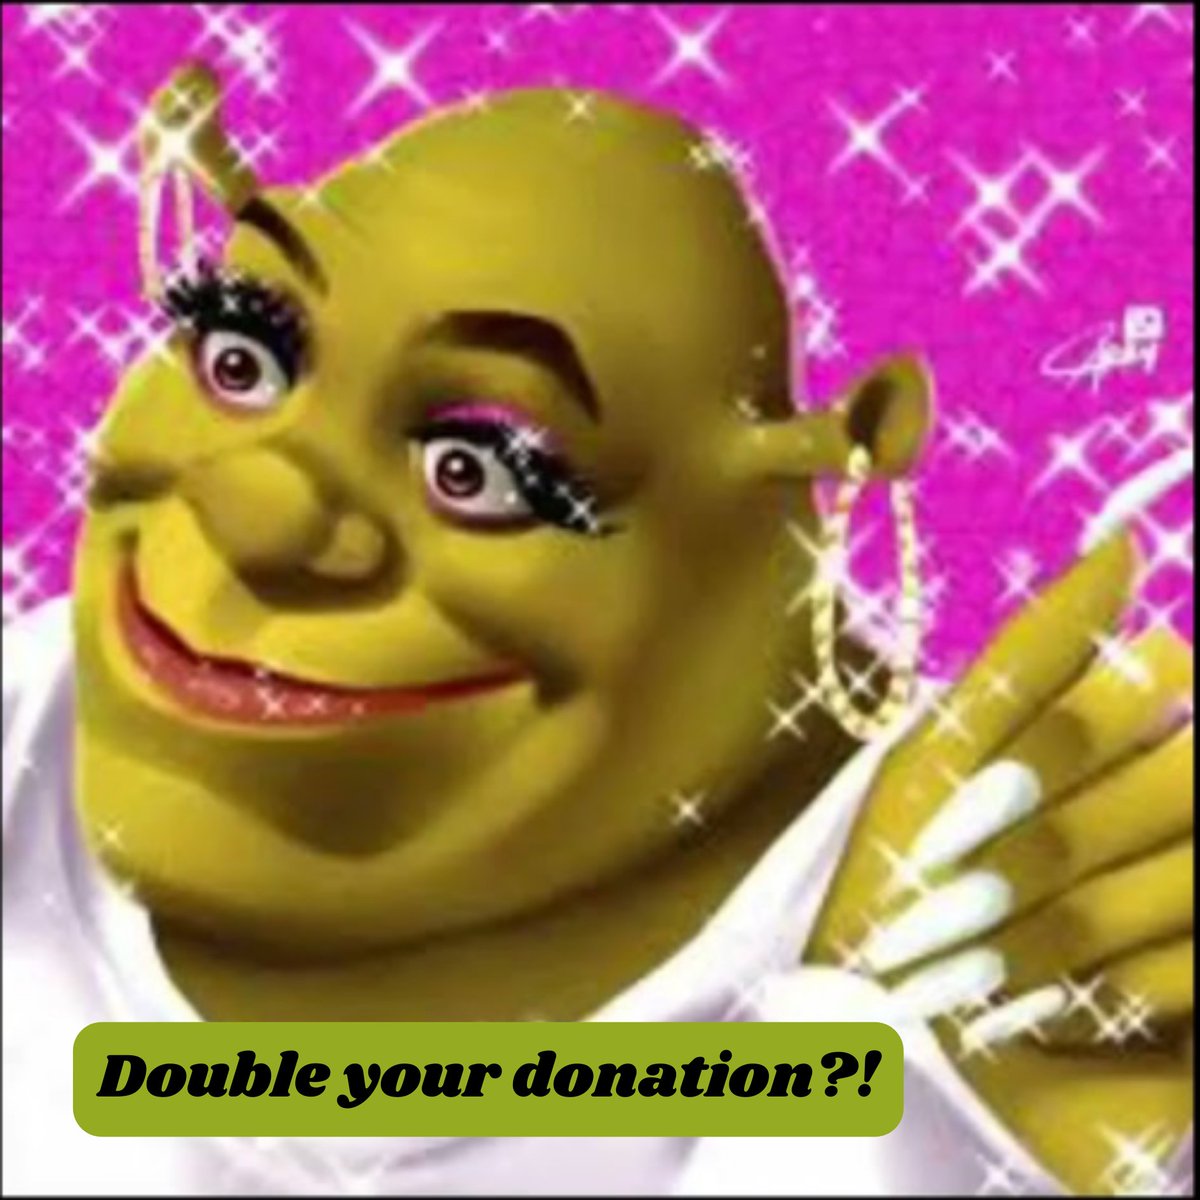 Last day to donate to the #KHJN Fund-a-thon! Can you help us reach our $50k goal?! We are in luck! Fairy Godmother's wand doubled your donations up to the next $2,000. Let's make this ogre-sized dream come true! Donate today at fund.nnaf.org/khjn24